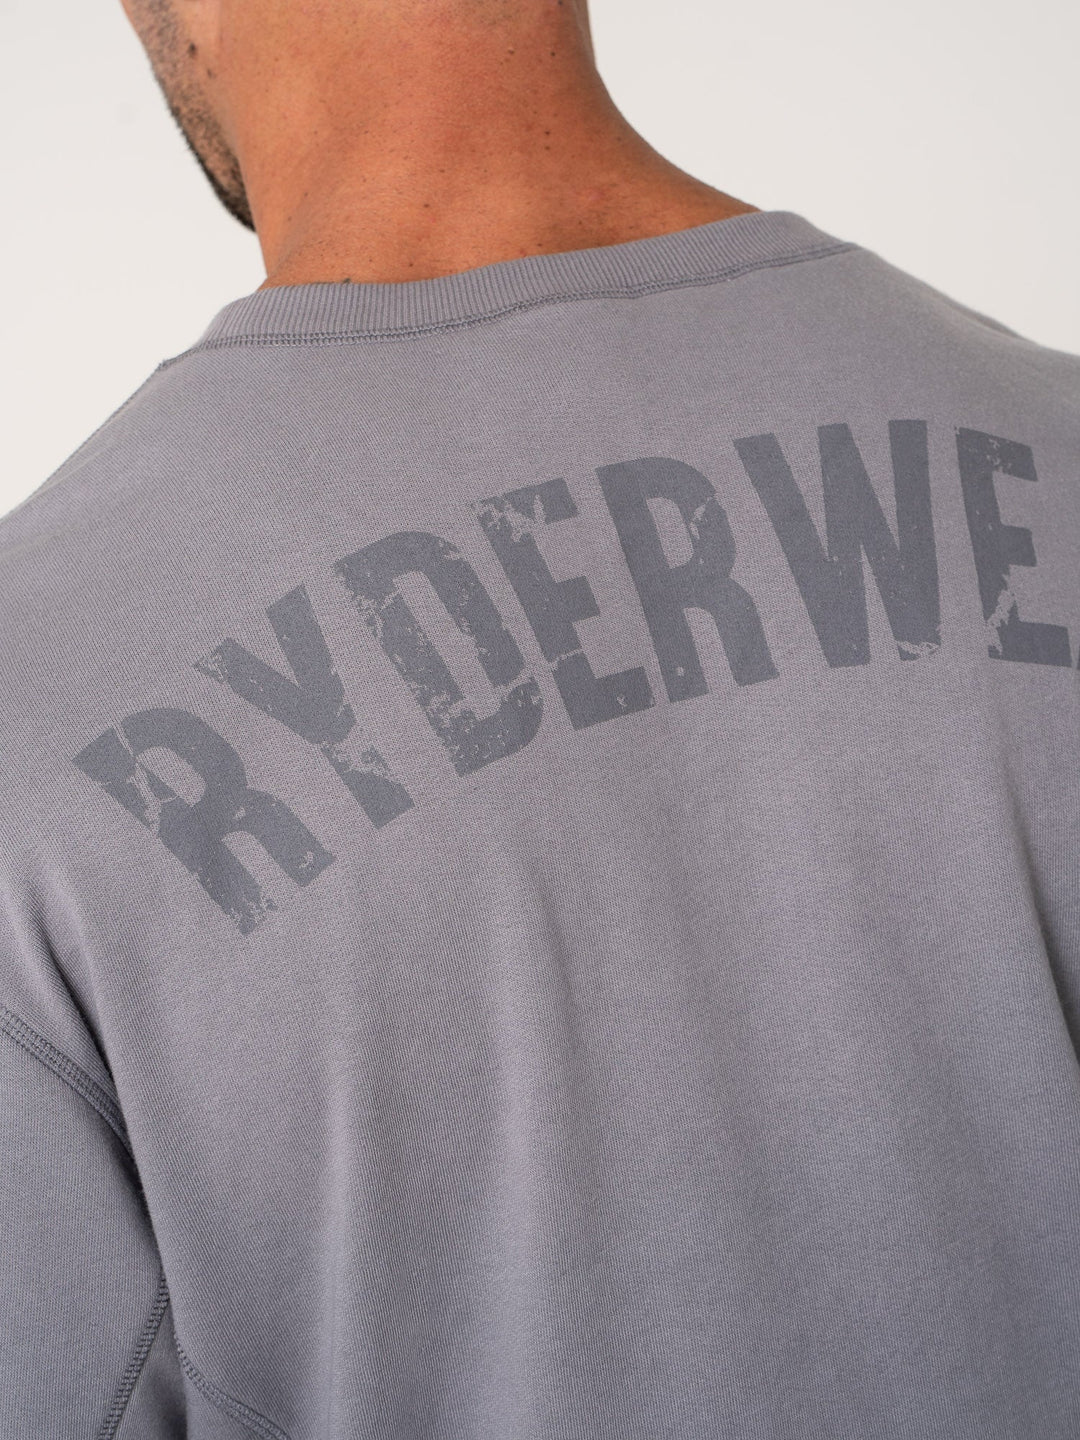 Force Crew Neck - Charcoal Clothing Ryderwear 